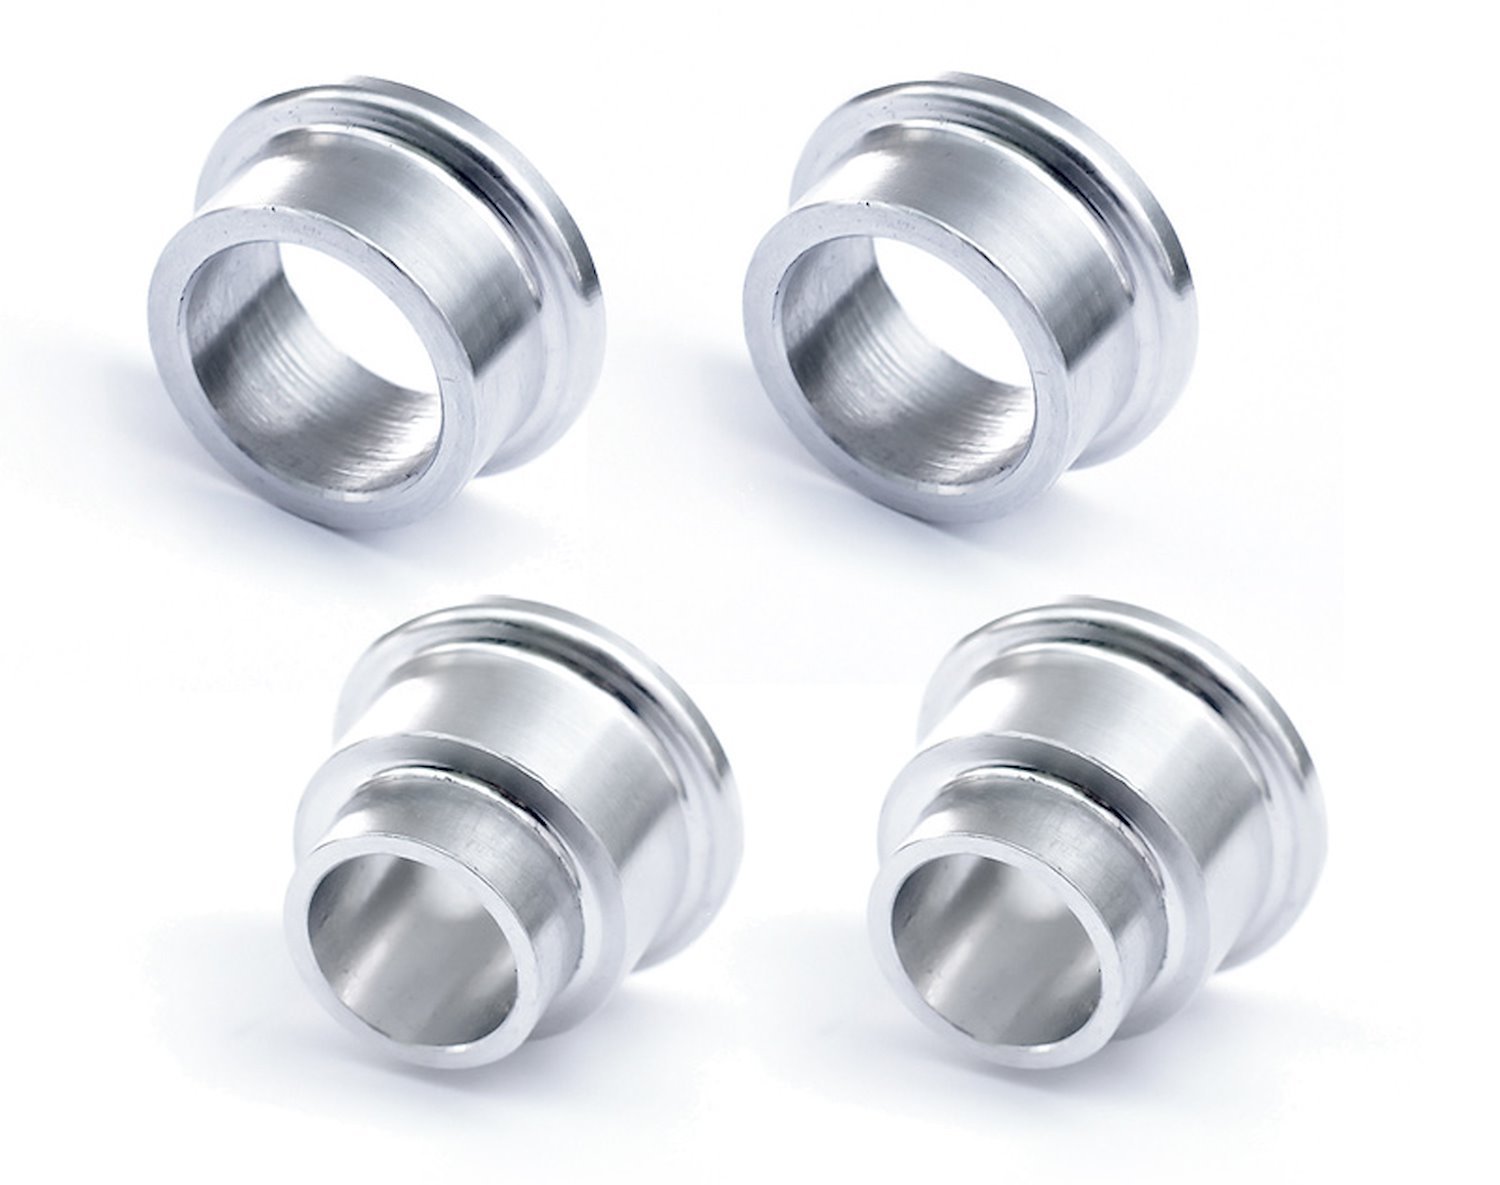 Bearing Spacer KIT. Includes Two .625 Spacers and